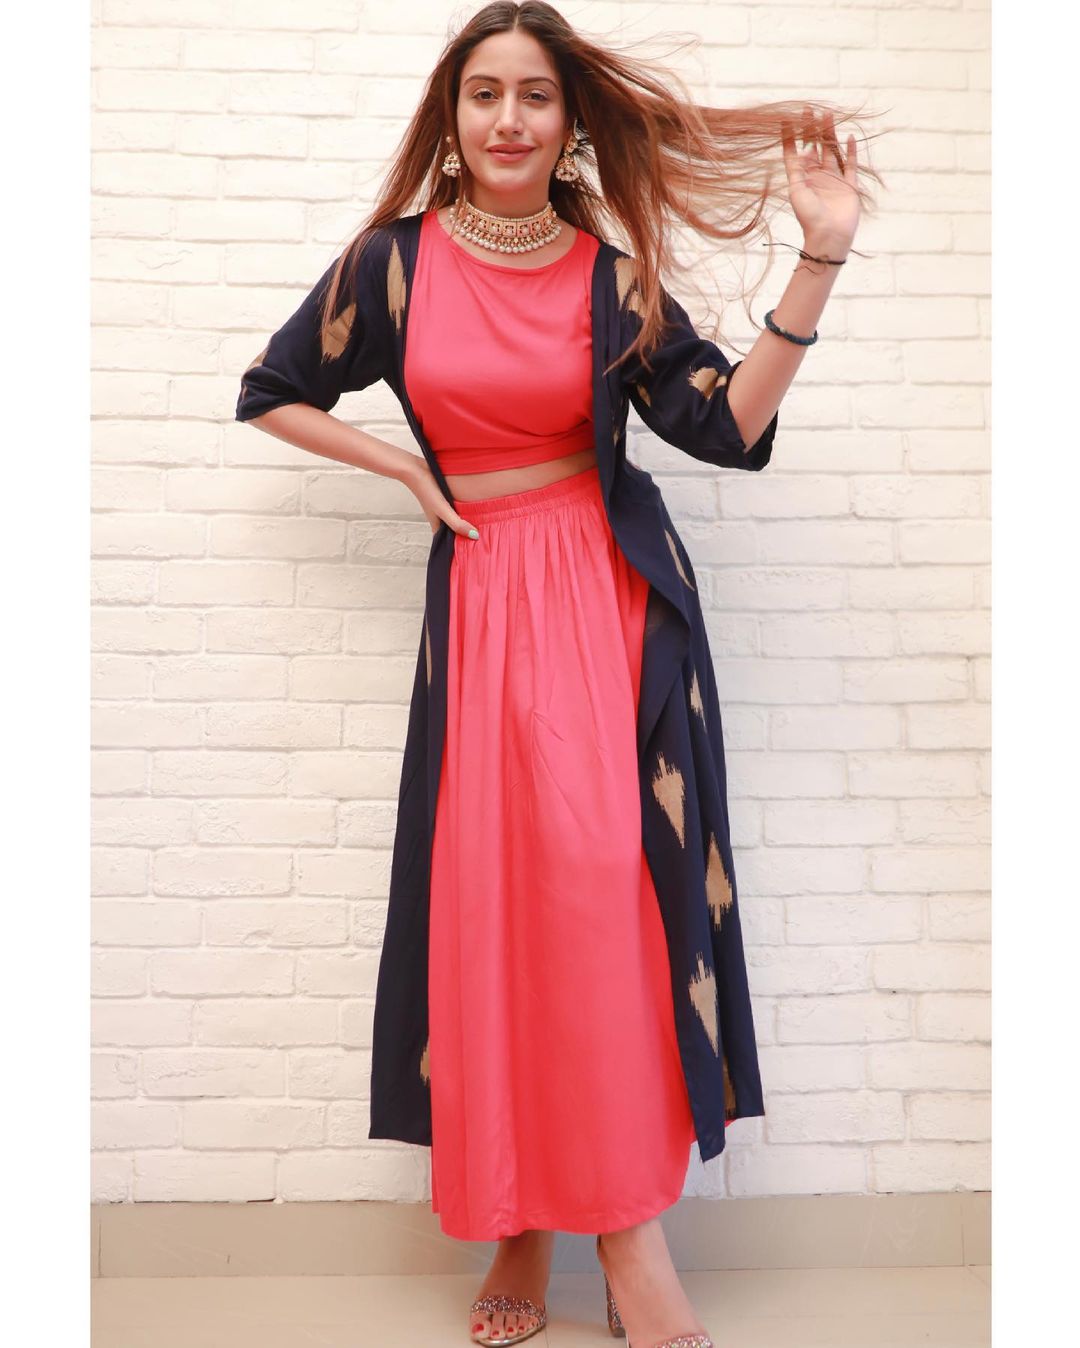  Surbhi Chandna looks charming in the plain pink ensemble by accessorising it with ornate jewellery. (Image: Instagram)